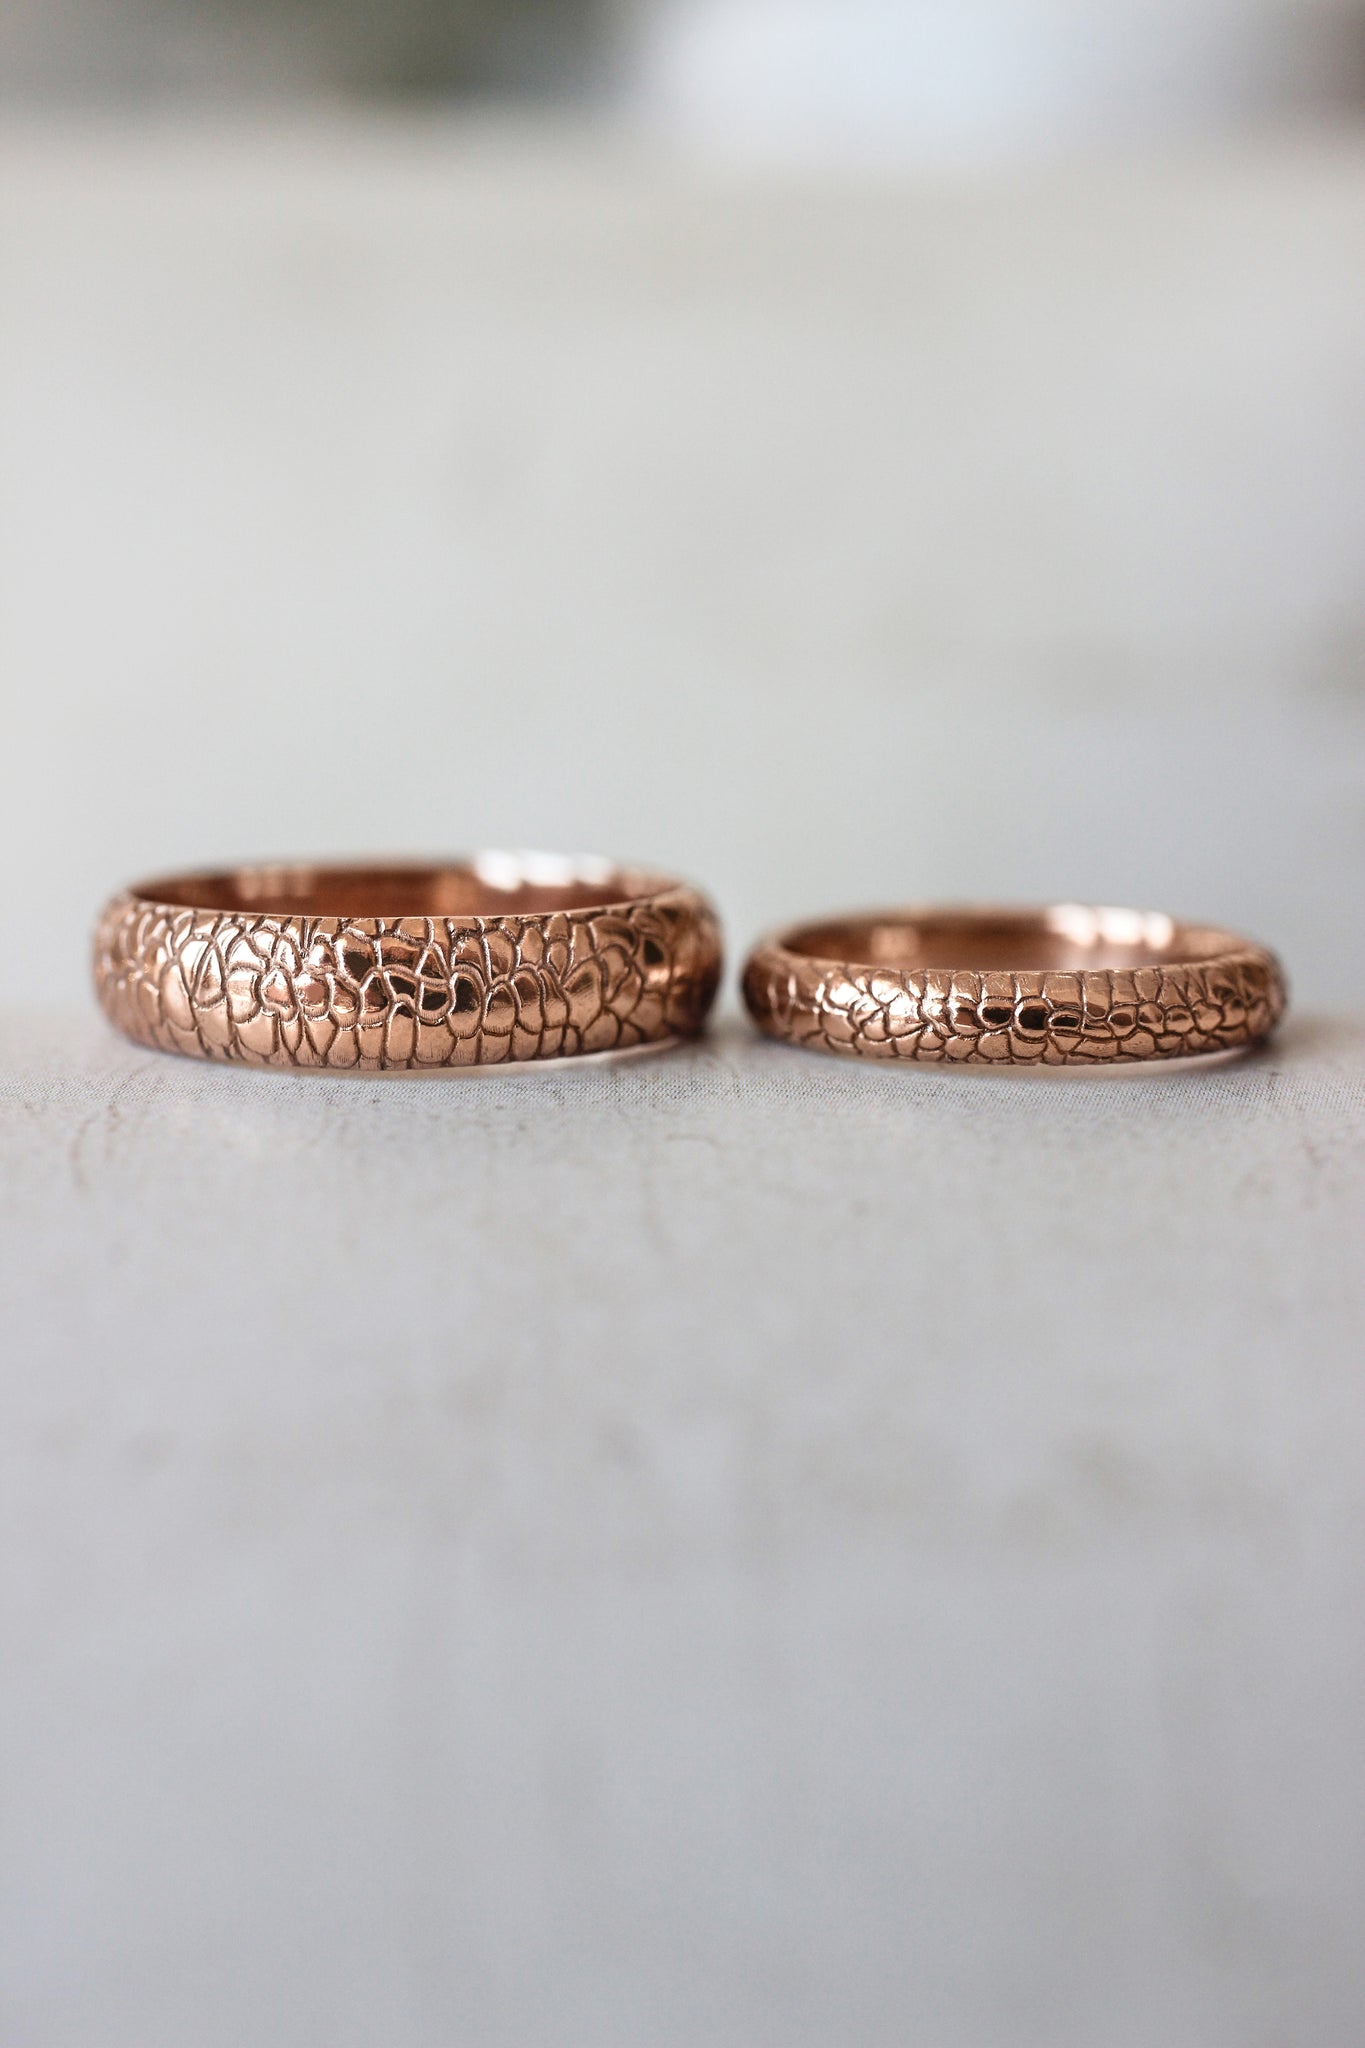 Reptile skin ring, 3 mm wedding band for woman - Eden Garden Jewelry™